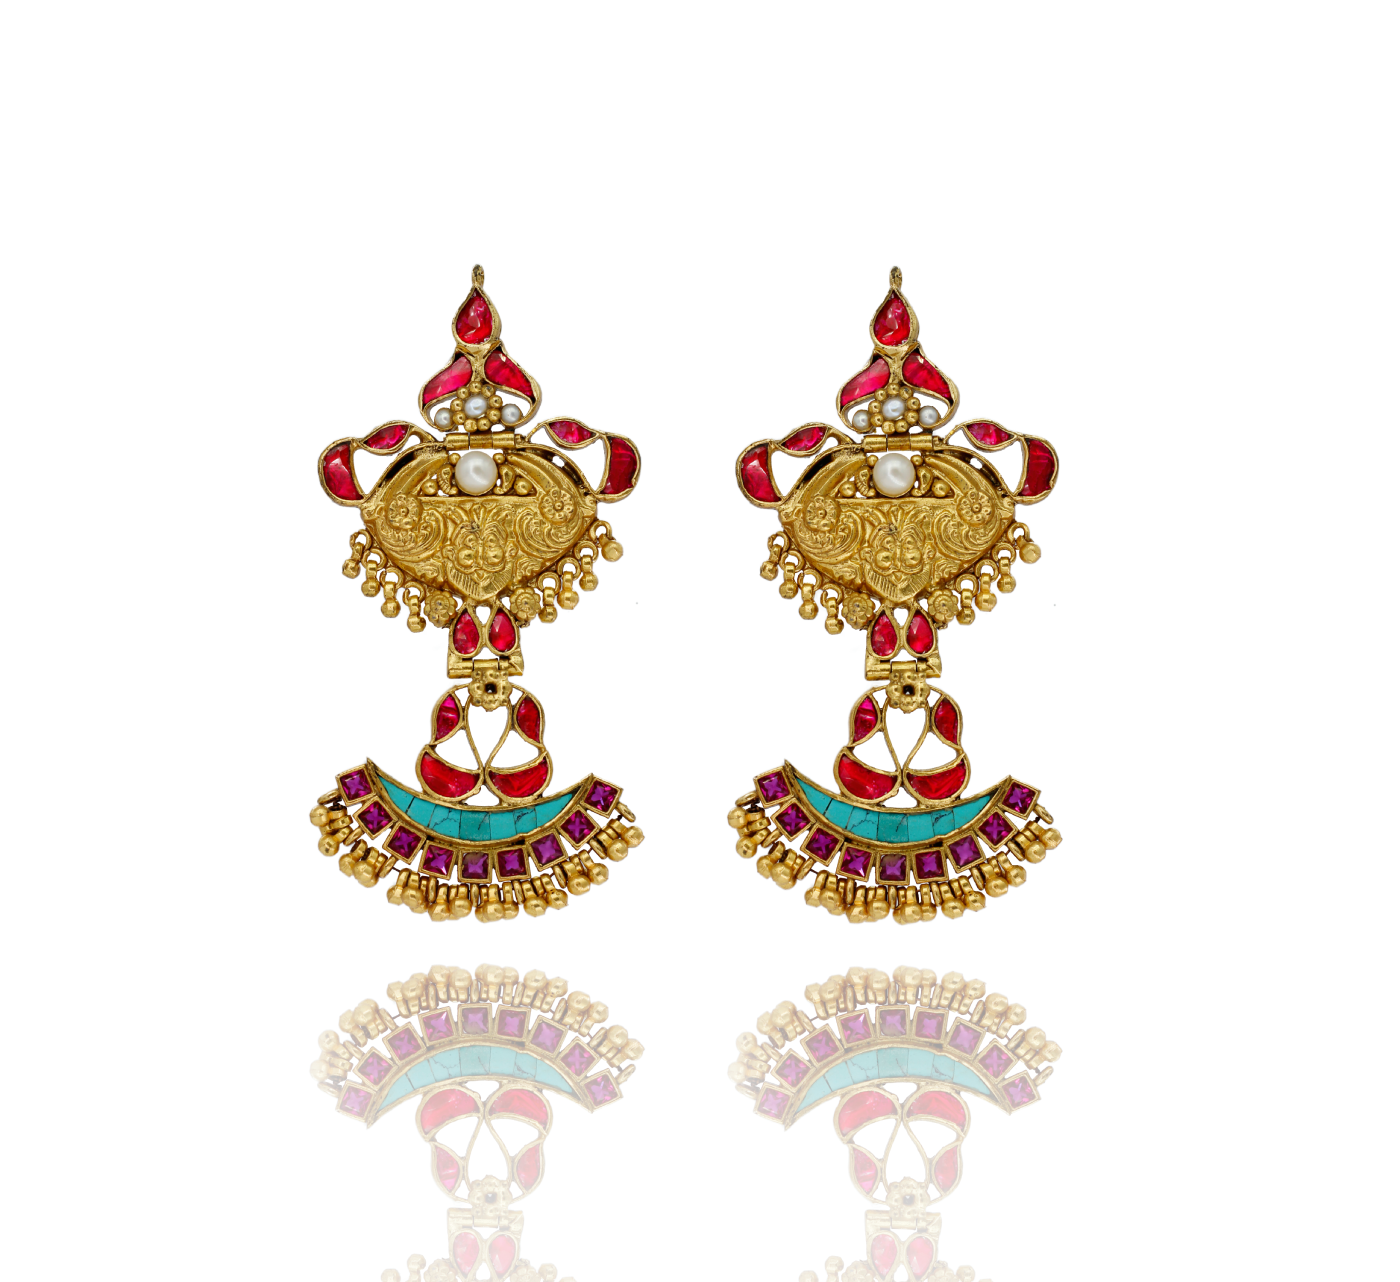 EARRINGS:- 92.5 STERLING SILVER GOLD PLATED WITH PINK ONYX, TURQUOISE, GARNET & PEARLS AND SILVER BEADS.